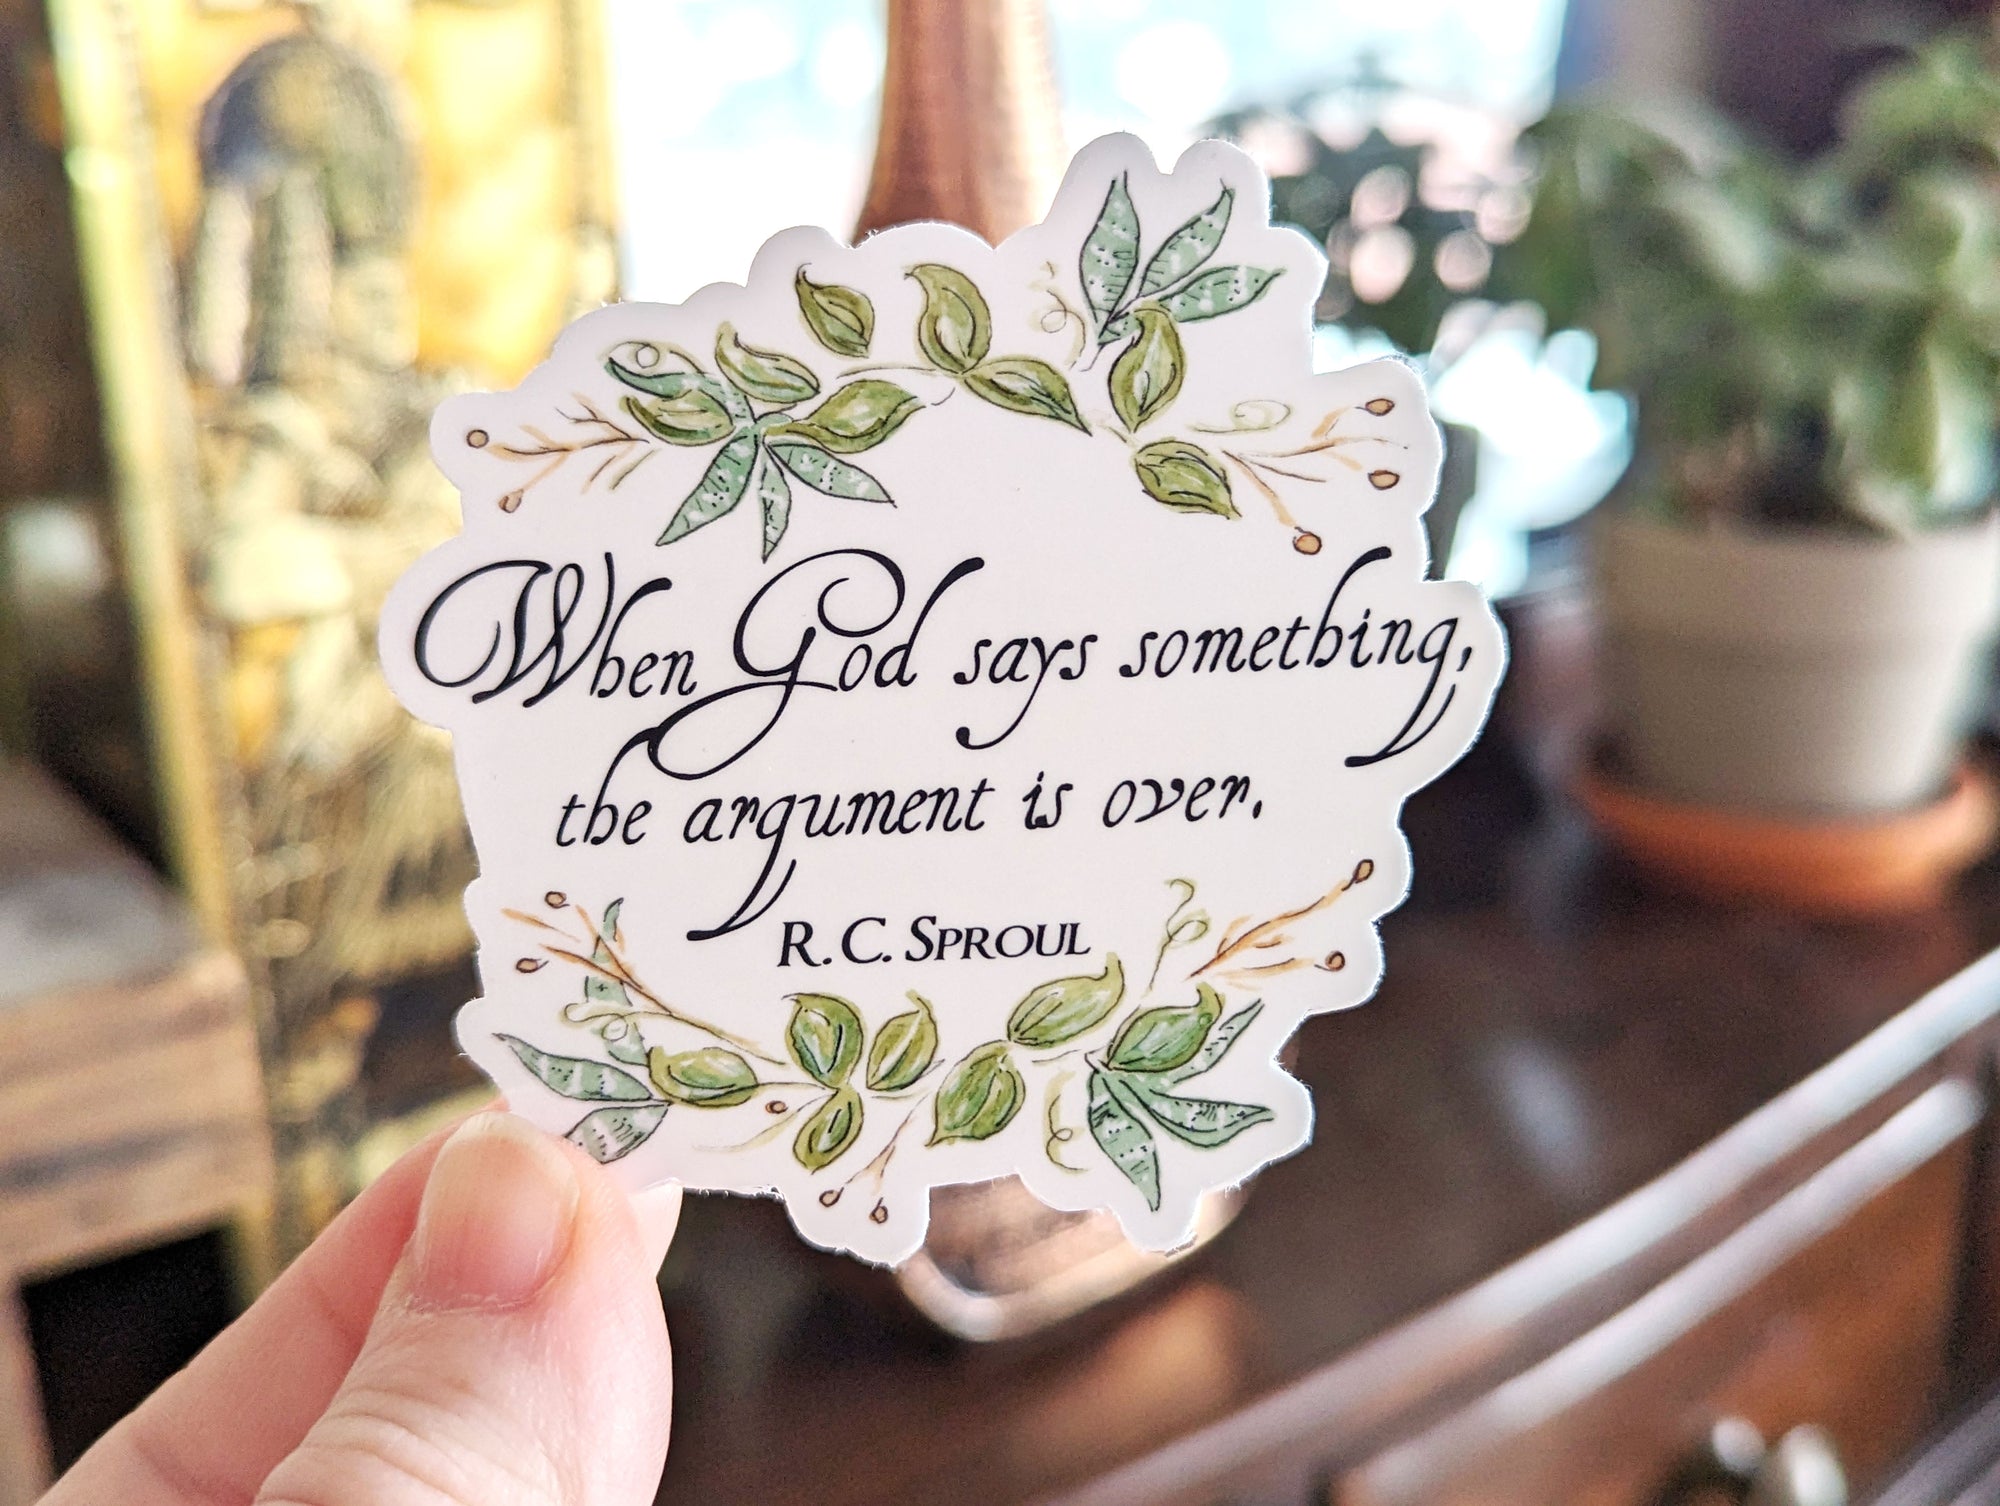 R. C. Sproul Quote Sticker